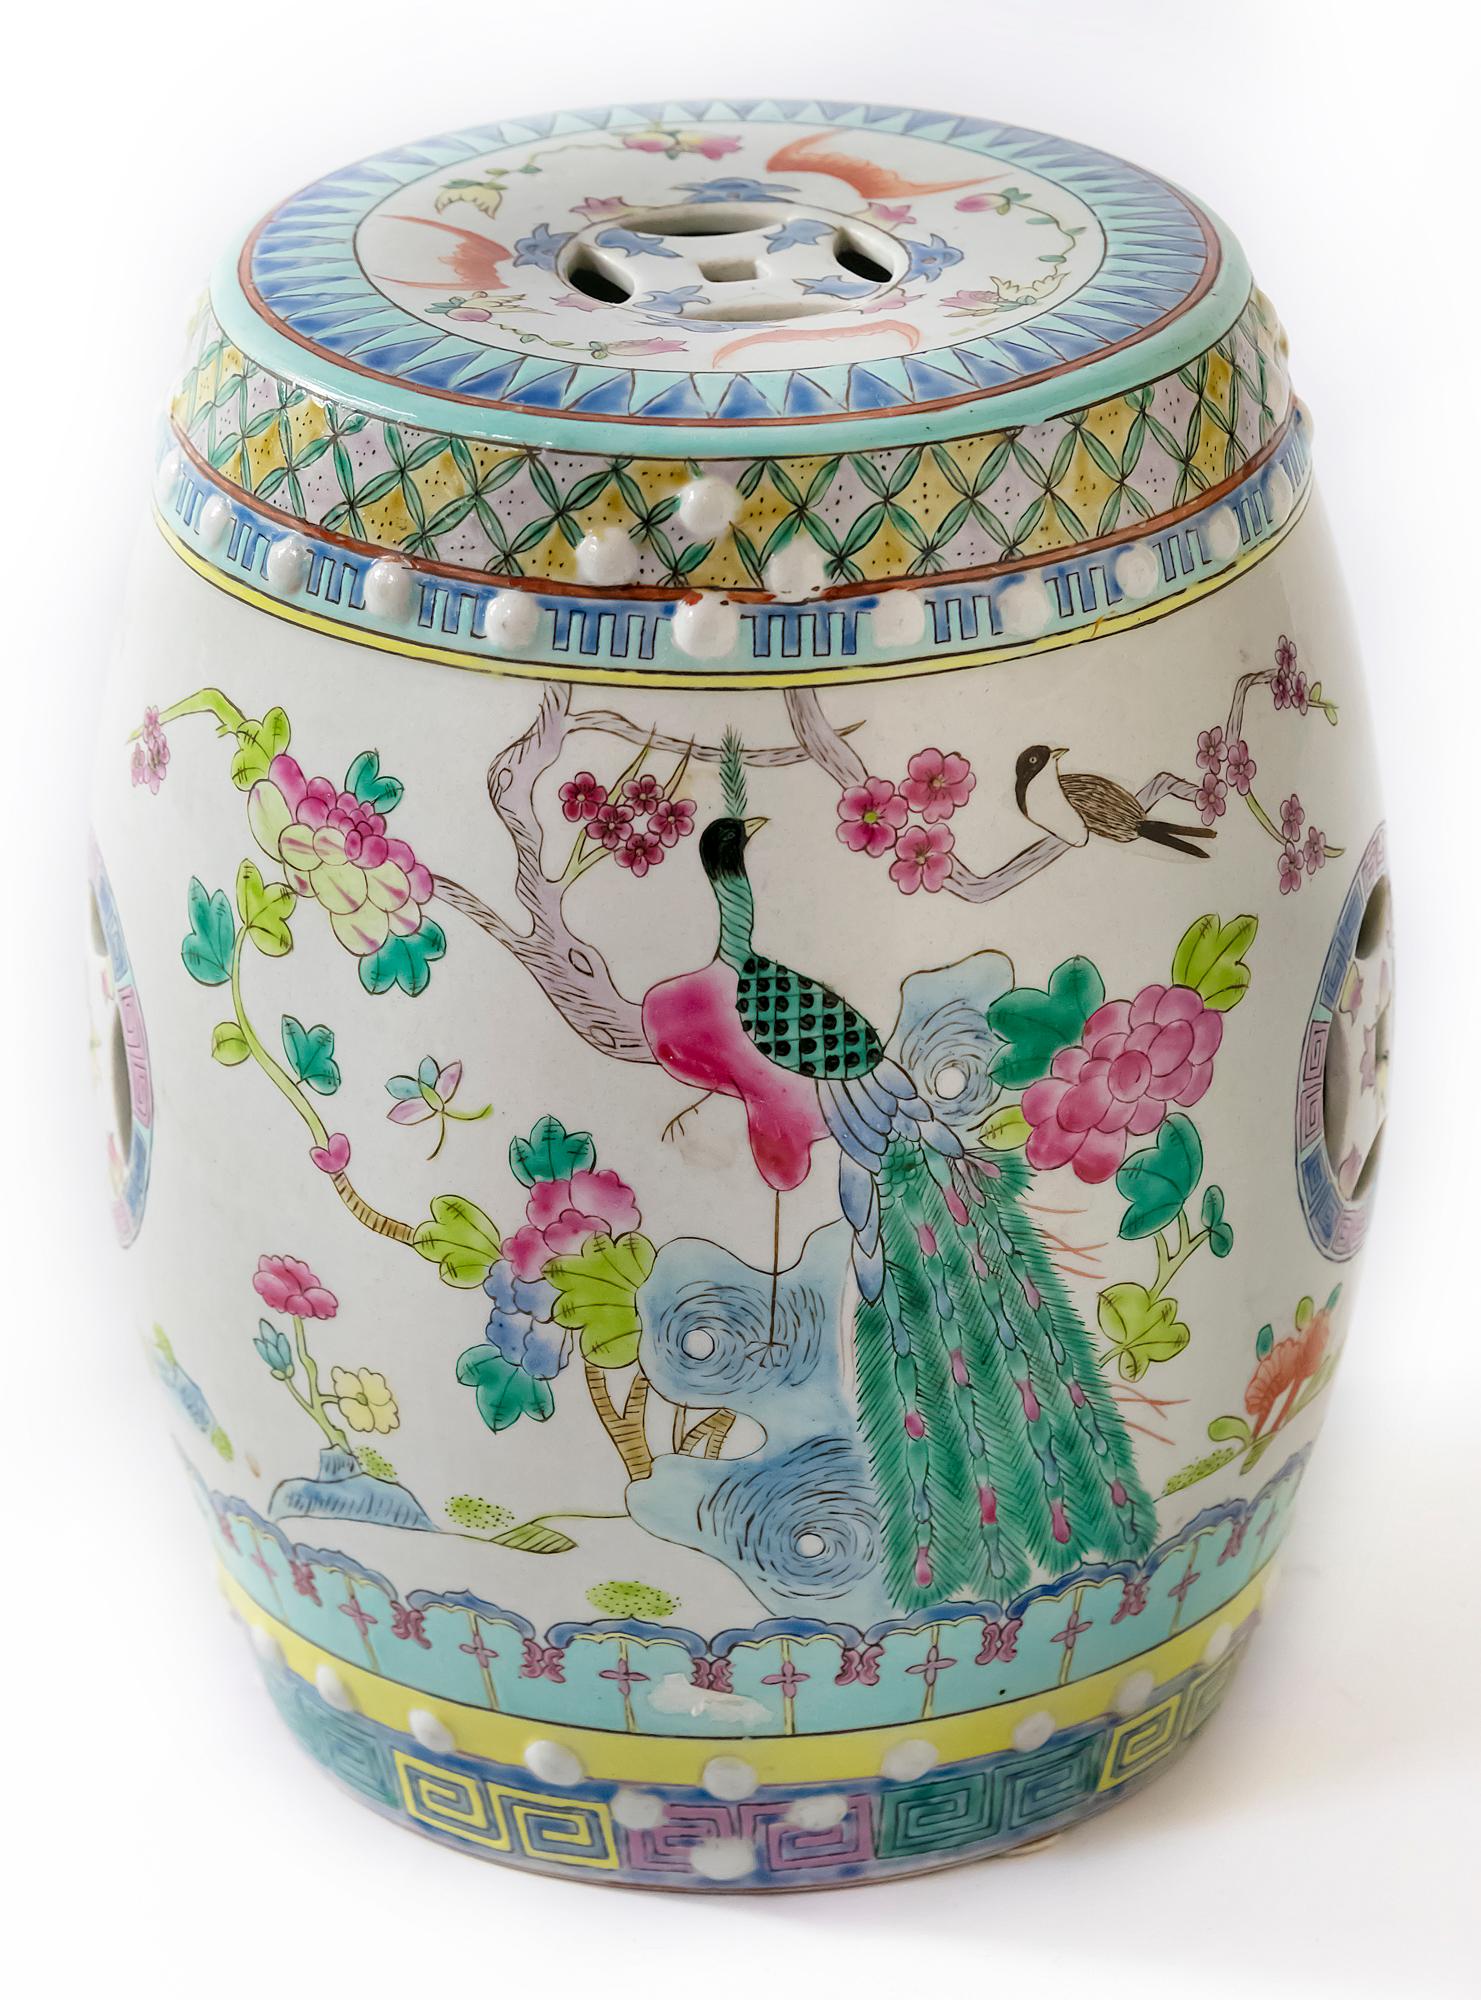 Small Chinese ceramic garden stool hand painted with birds and floral motives.

 